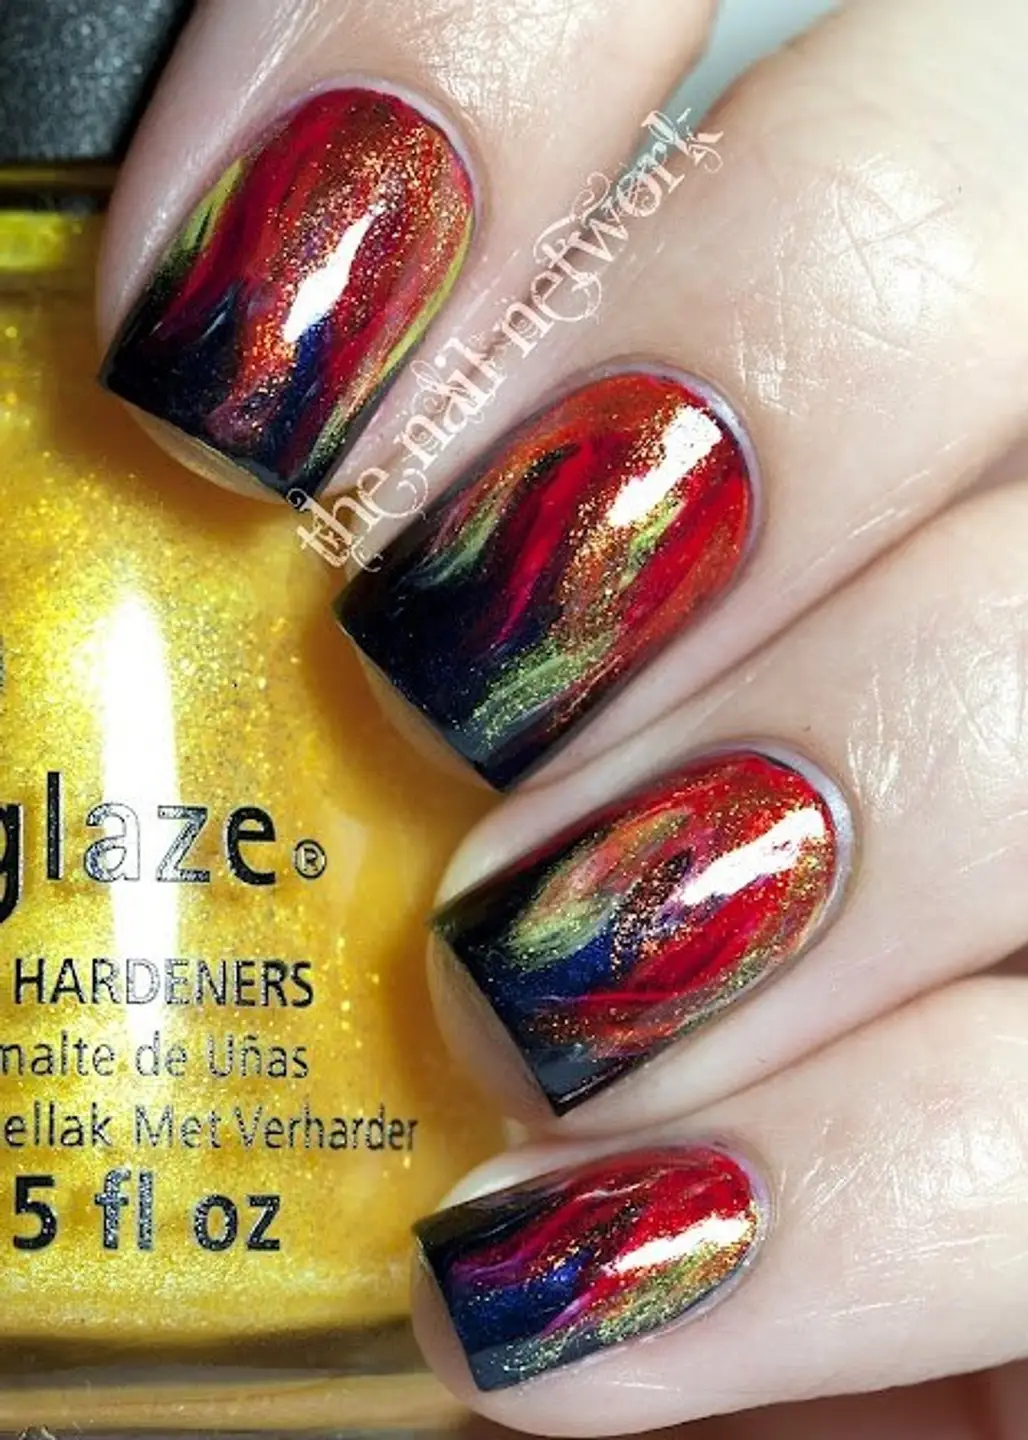 Hunger Games Fans Unite 30 of the Coolest Nail Art Deisgns Ever